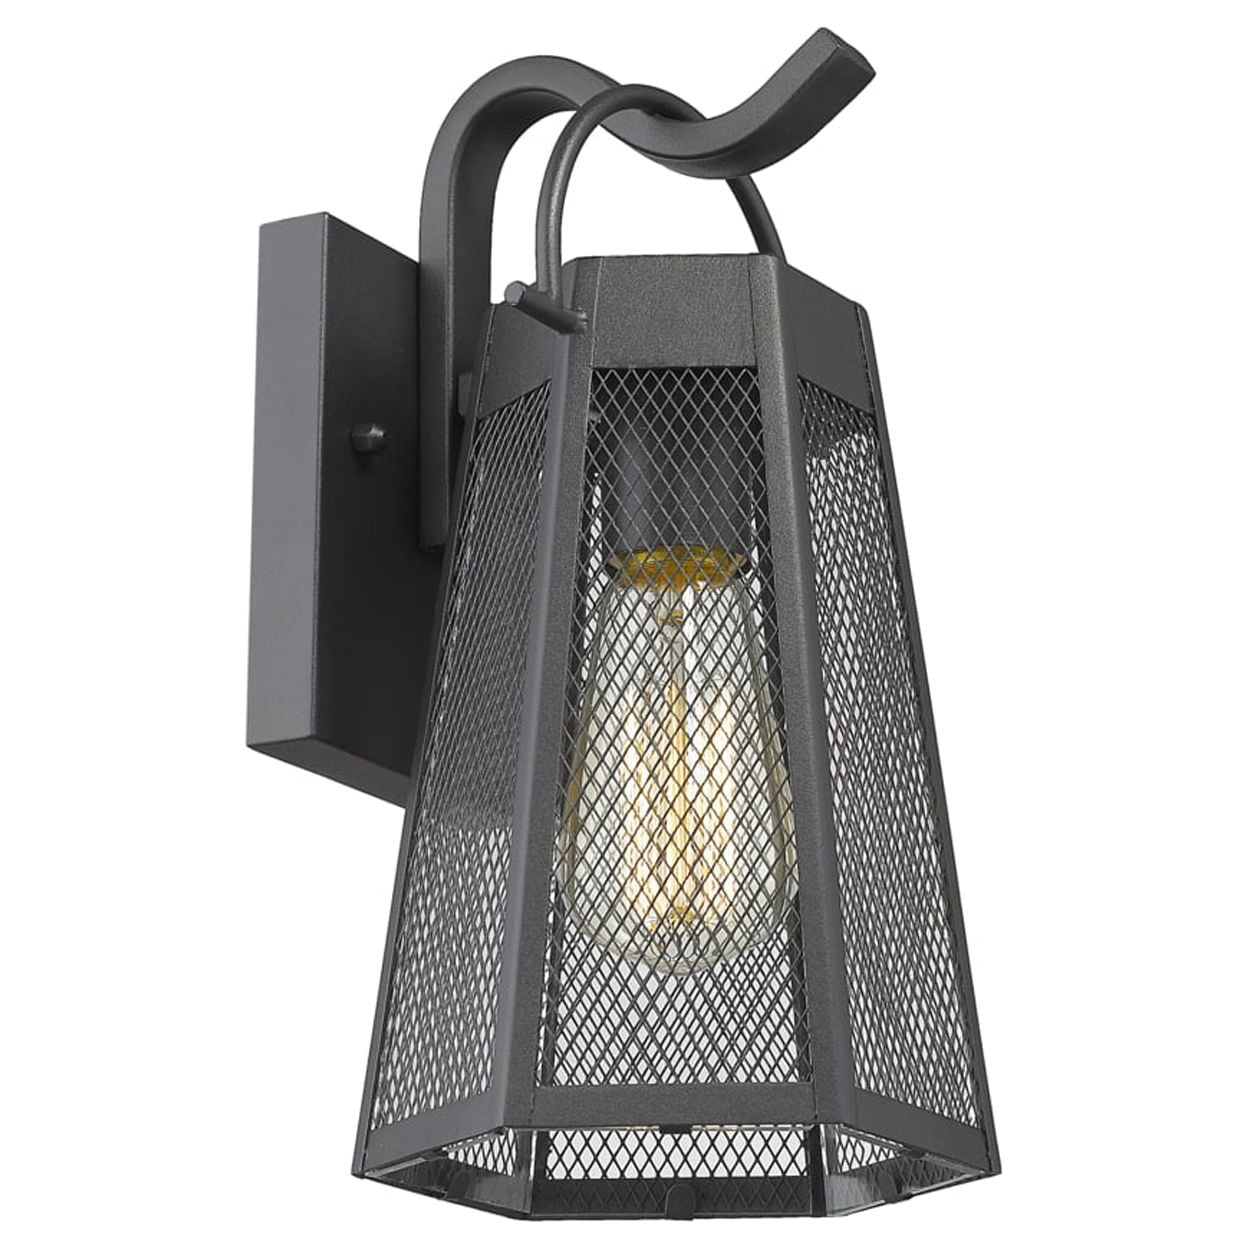 Ch2d288bk12-od1 Harper Industrial 1 Light Textured Black Outdoor Wall Sconce - 12 In.